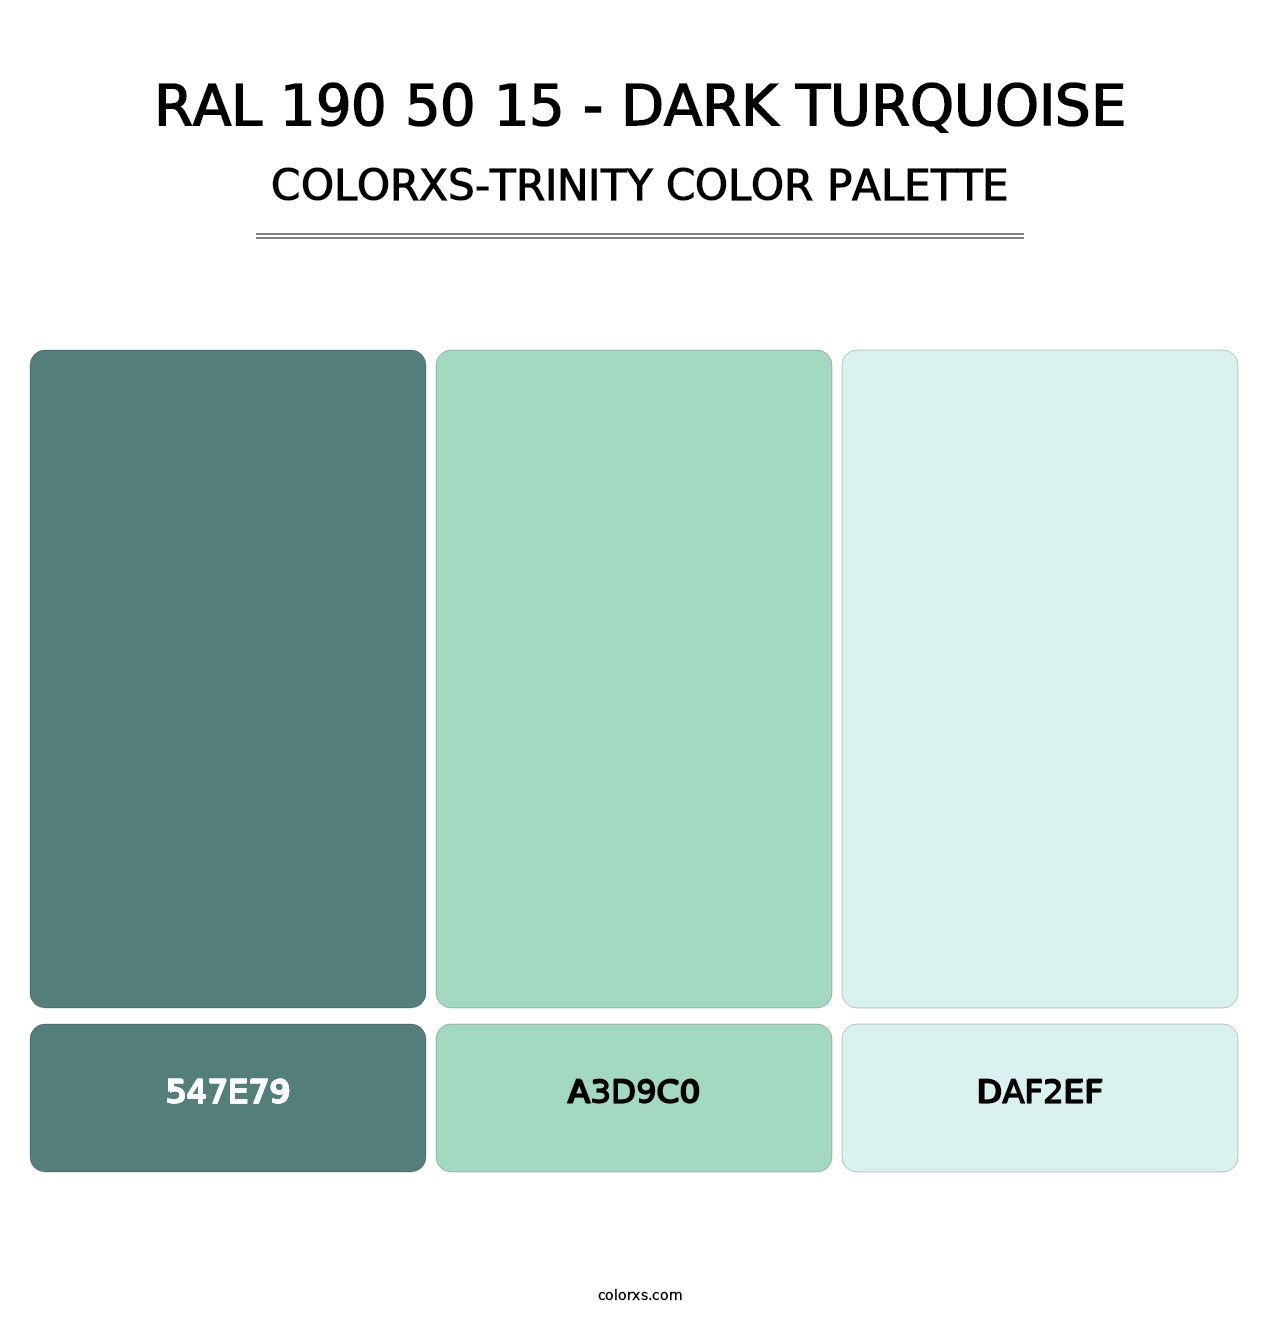 RAL 190 50 15 - Dark Turquoise - Colorxs Trinity Palette